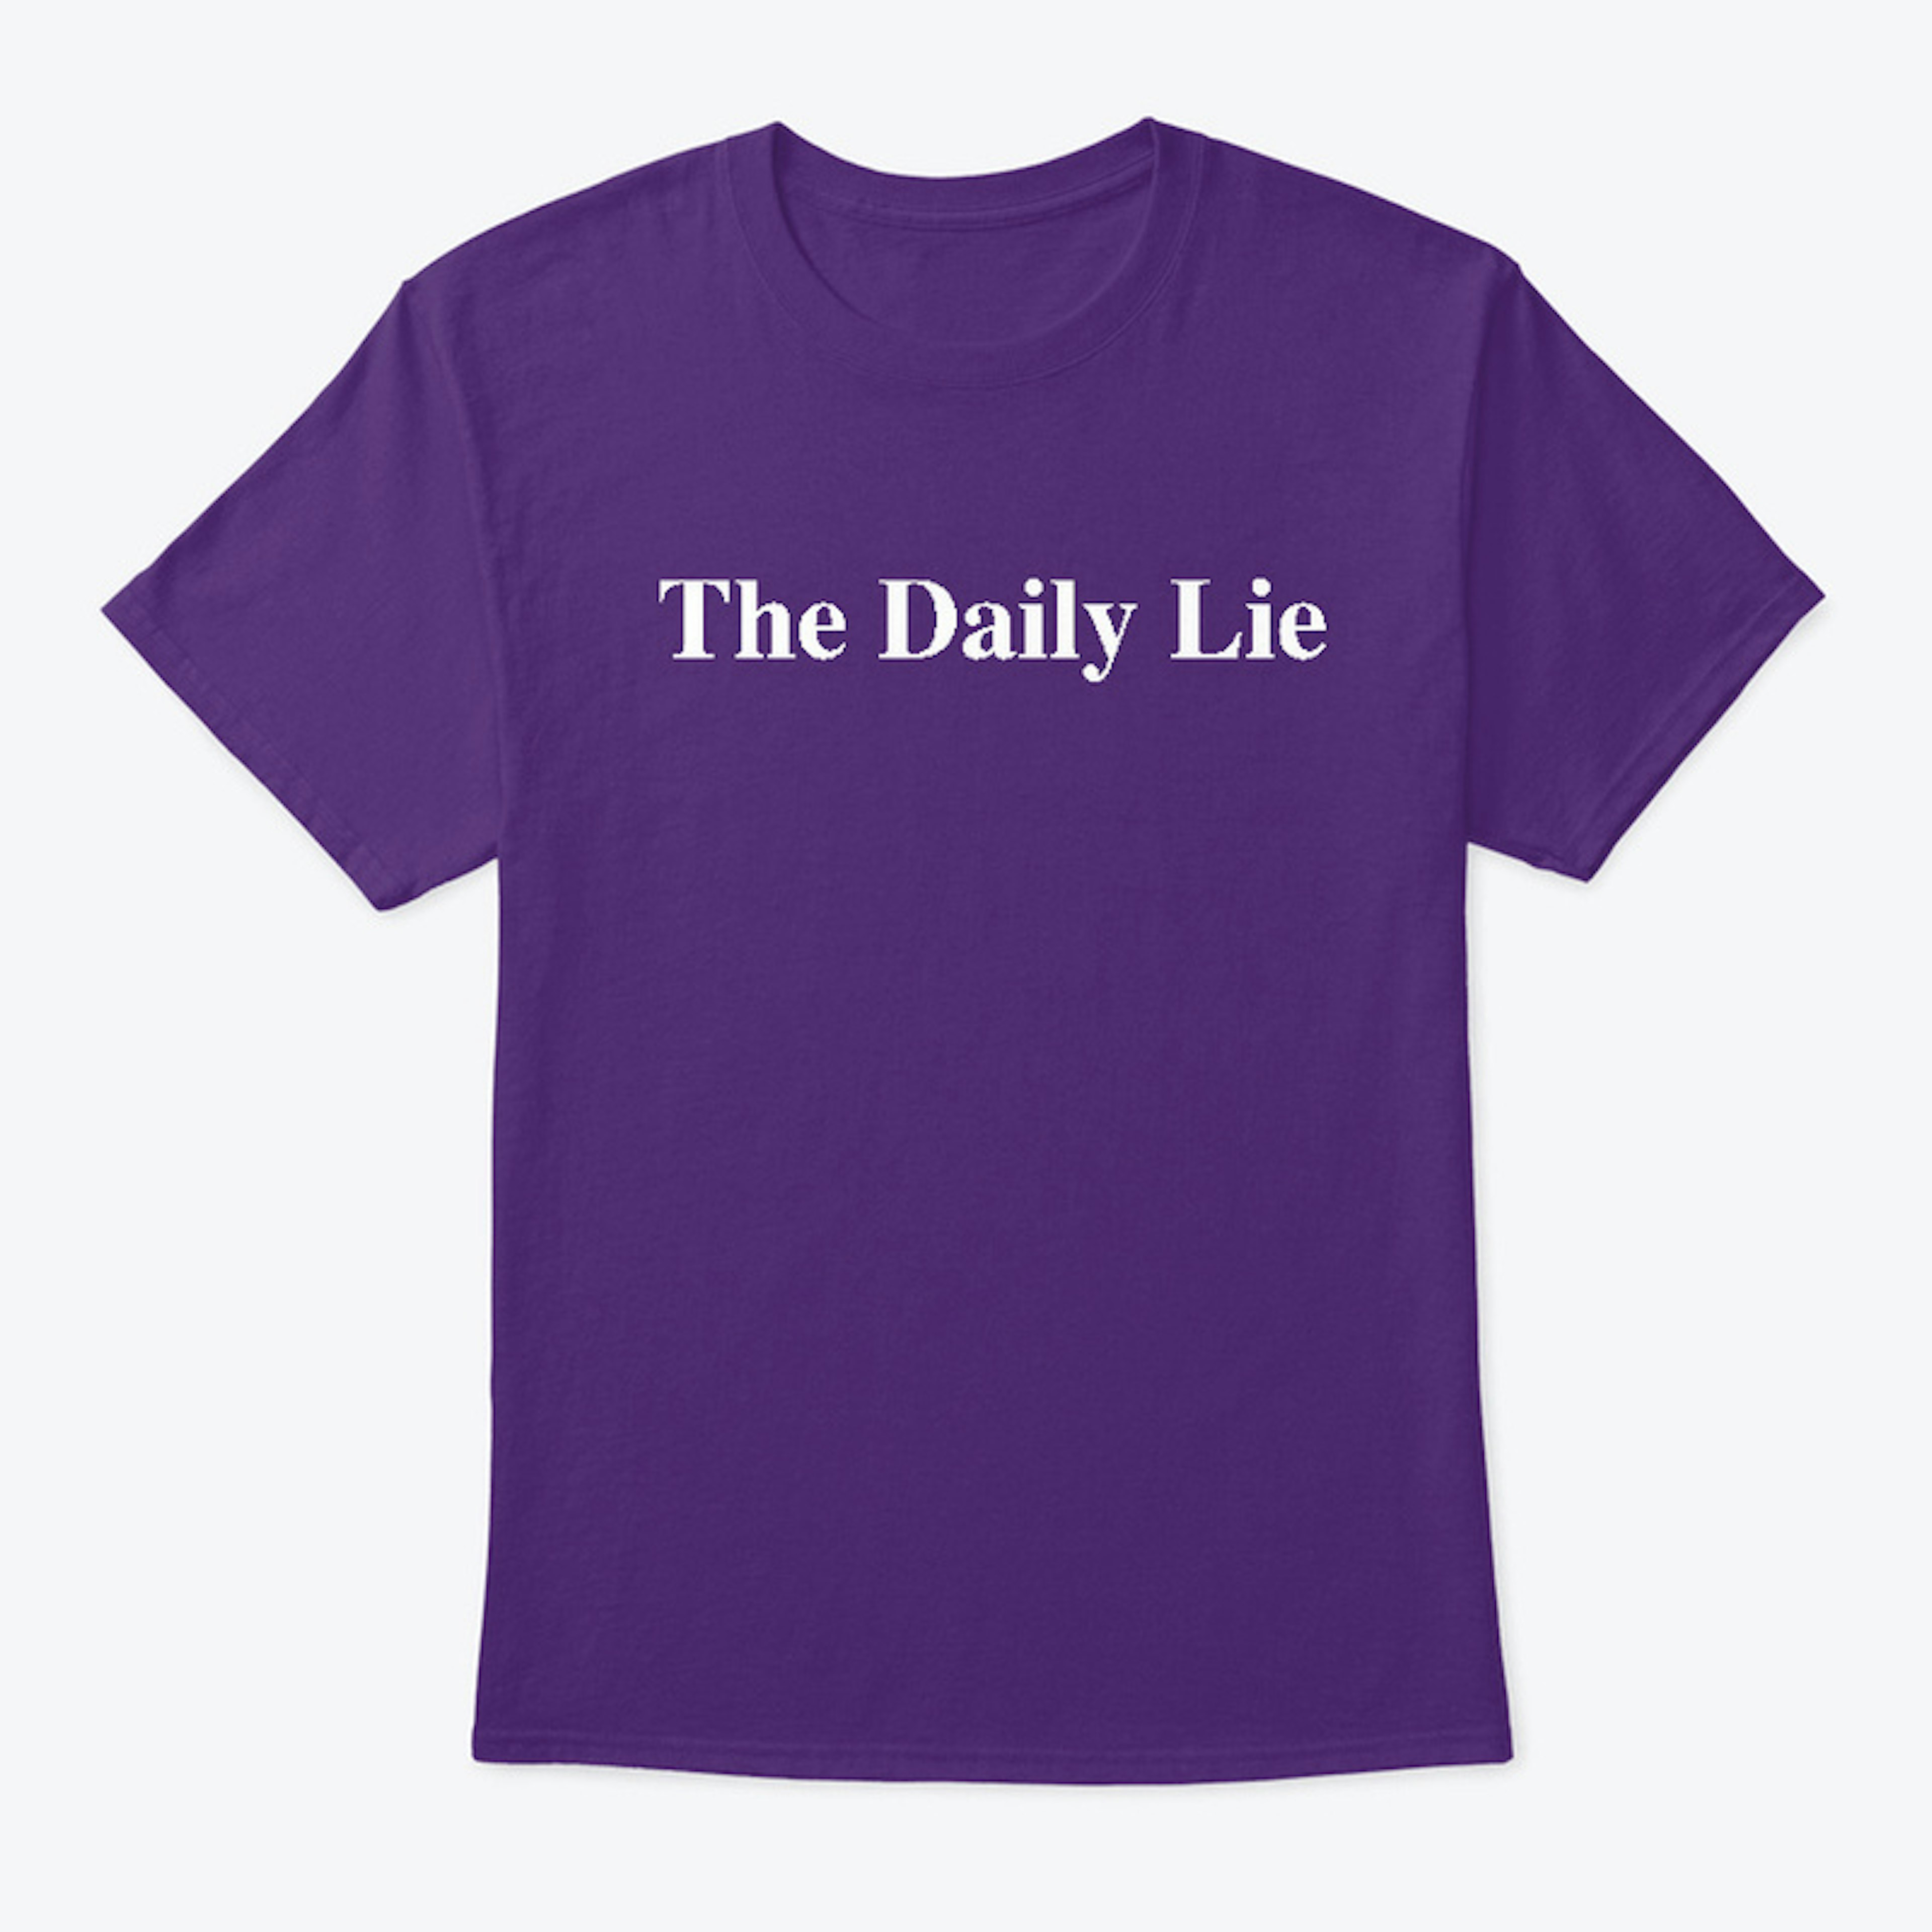 The Daily Lie